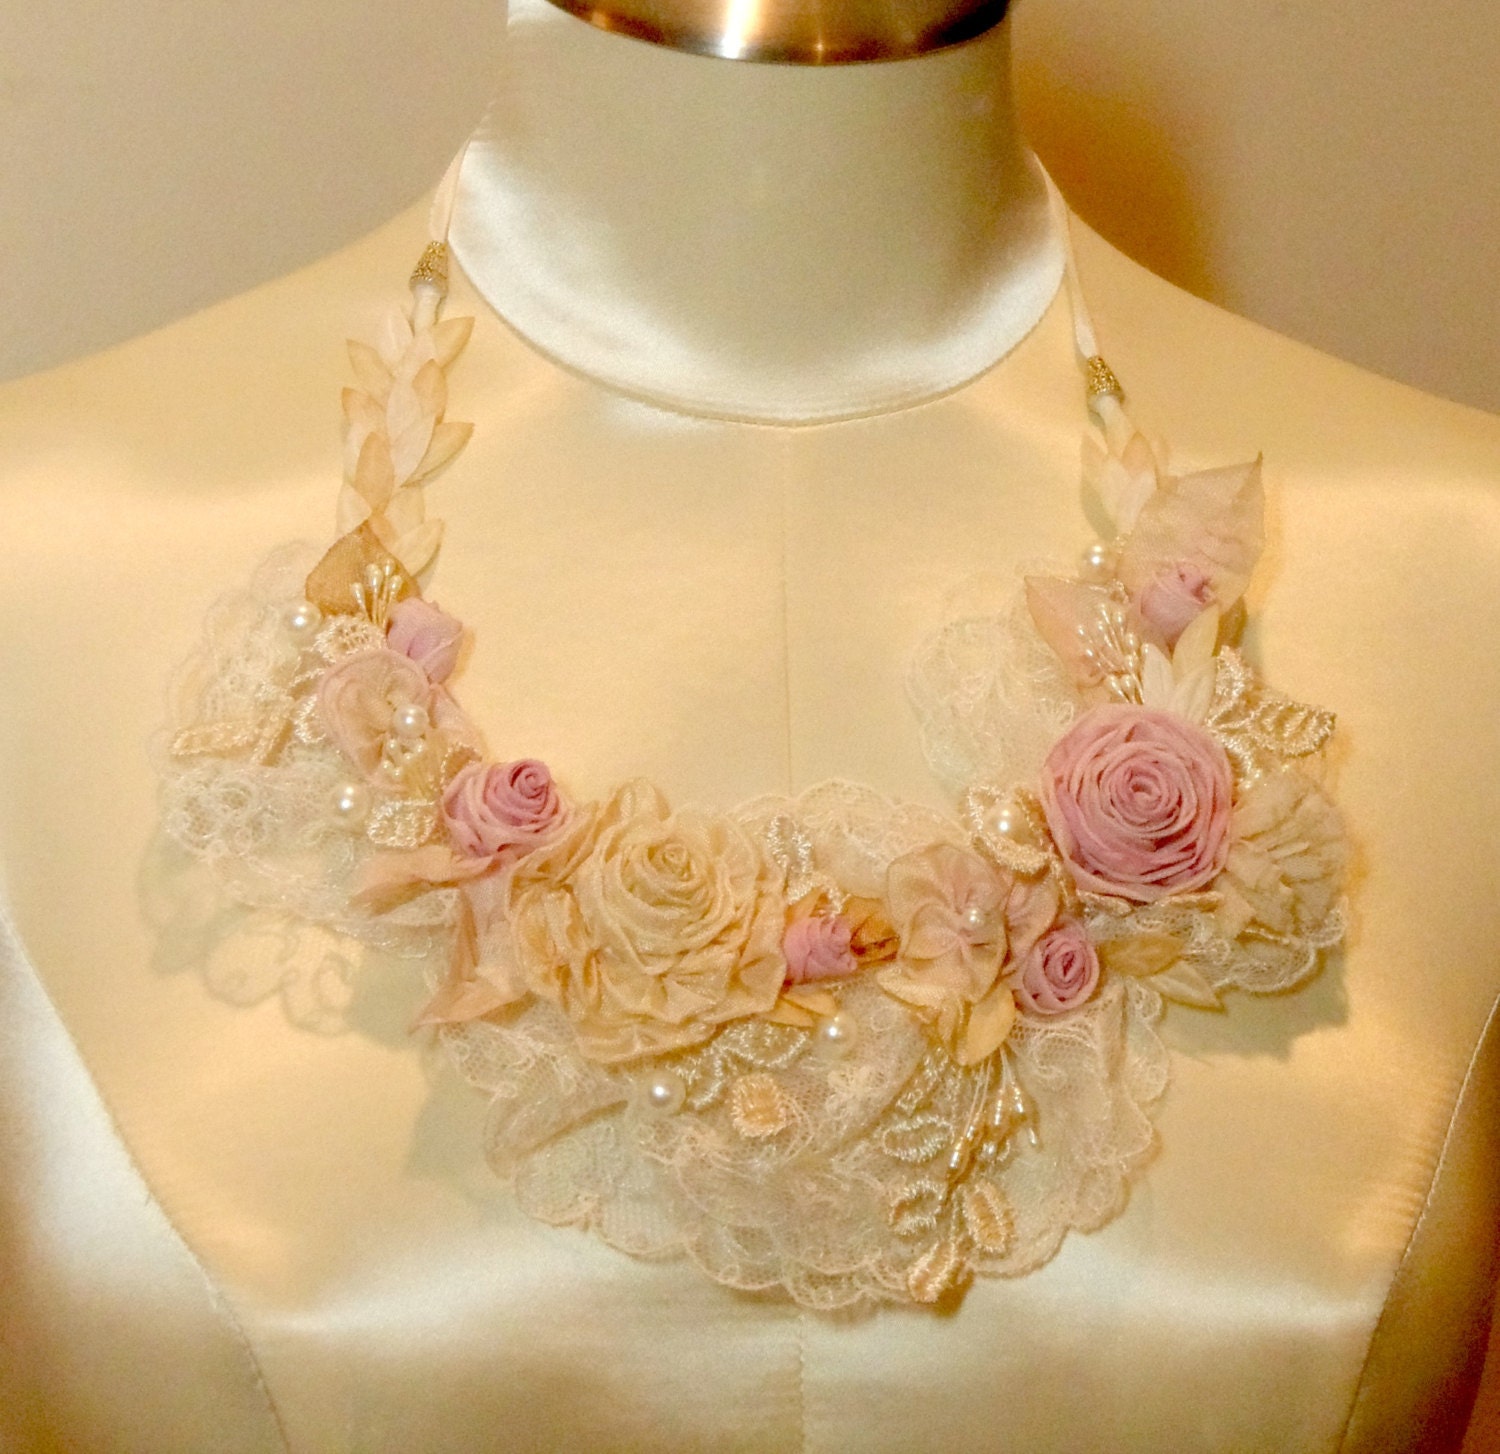 Ribbon Work Roses on Lace Pink and Cream  Roses Marie Antoinette